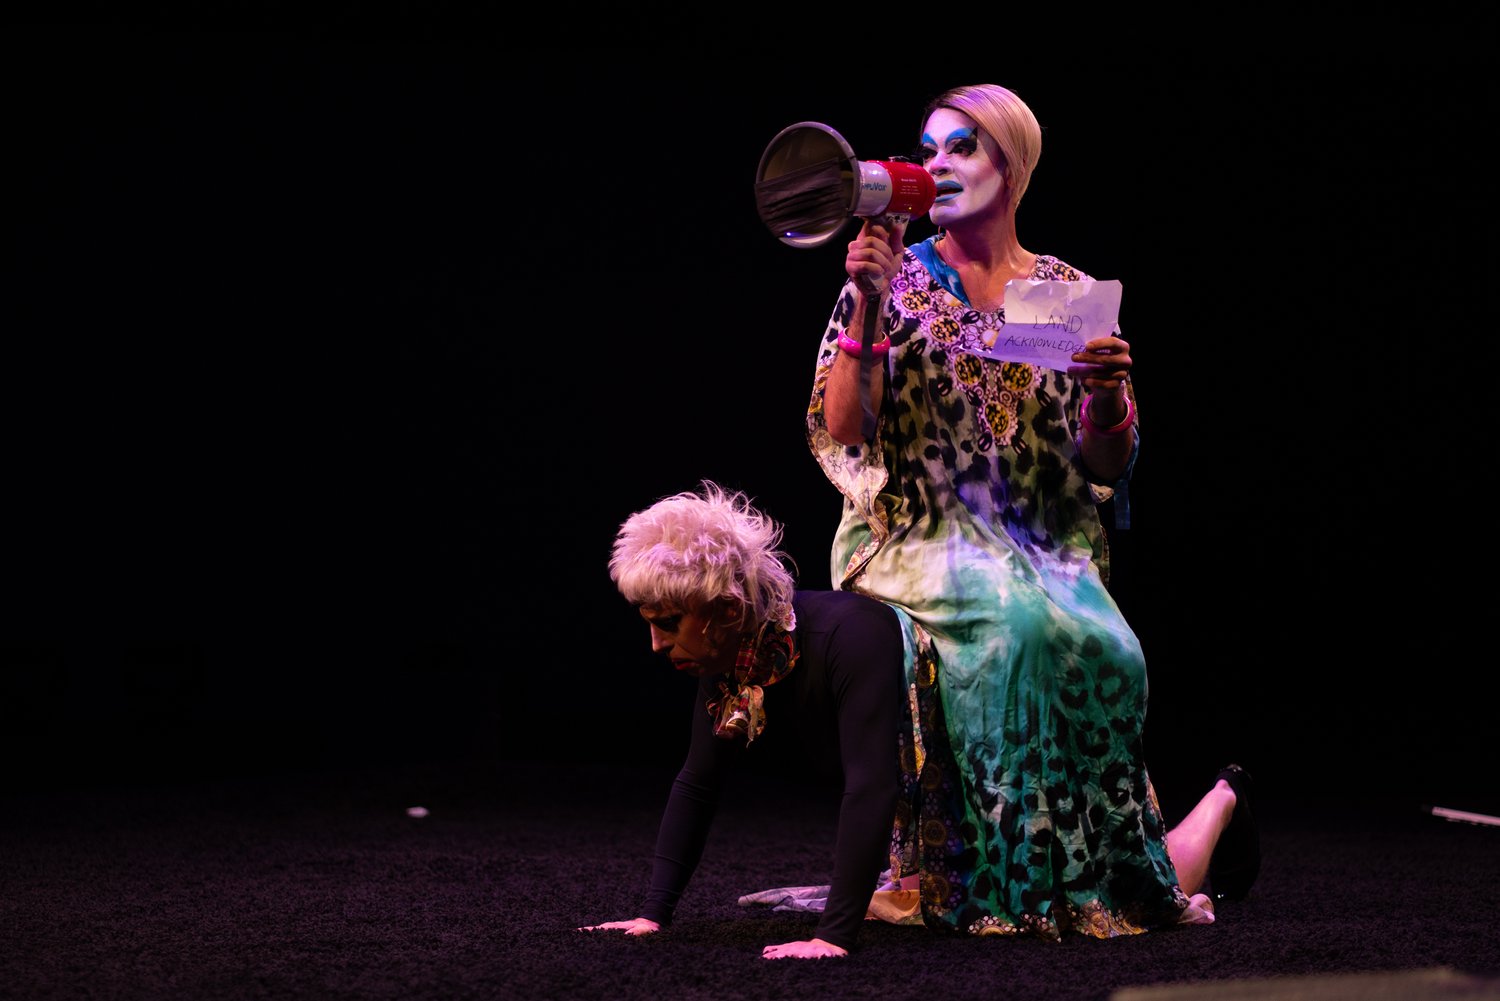 A photo of drag clown Carla Rossi sitting on a dark stage holding a bullhorn. In front of her is another person on their hands and knees facing the audience.